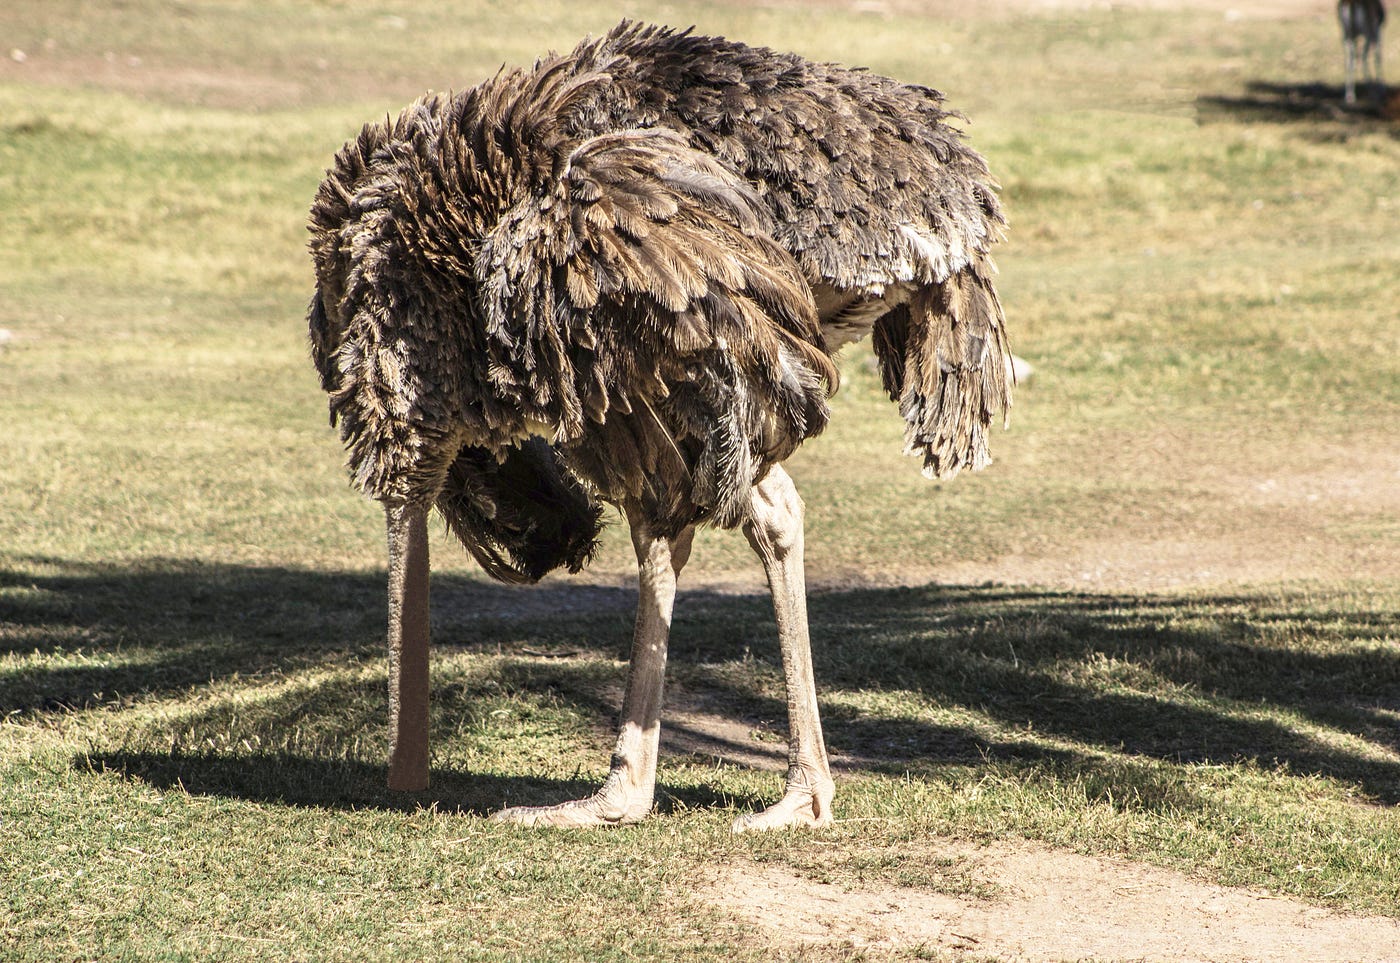 Do Ostriches Truly Bury Their Heads in the Sand? | by Fancied Facts | Medium